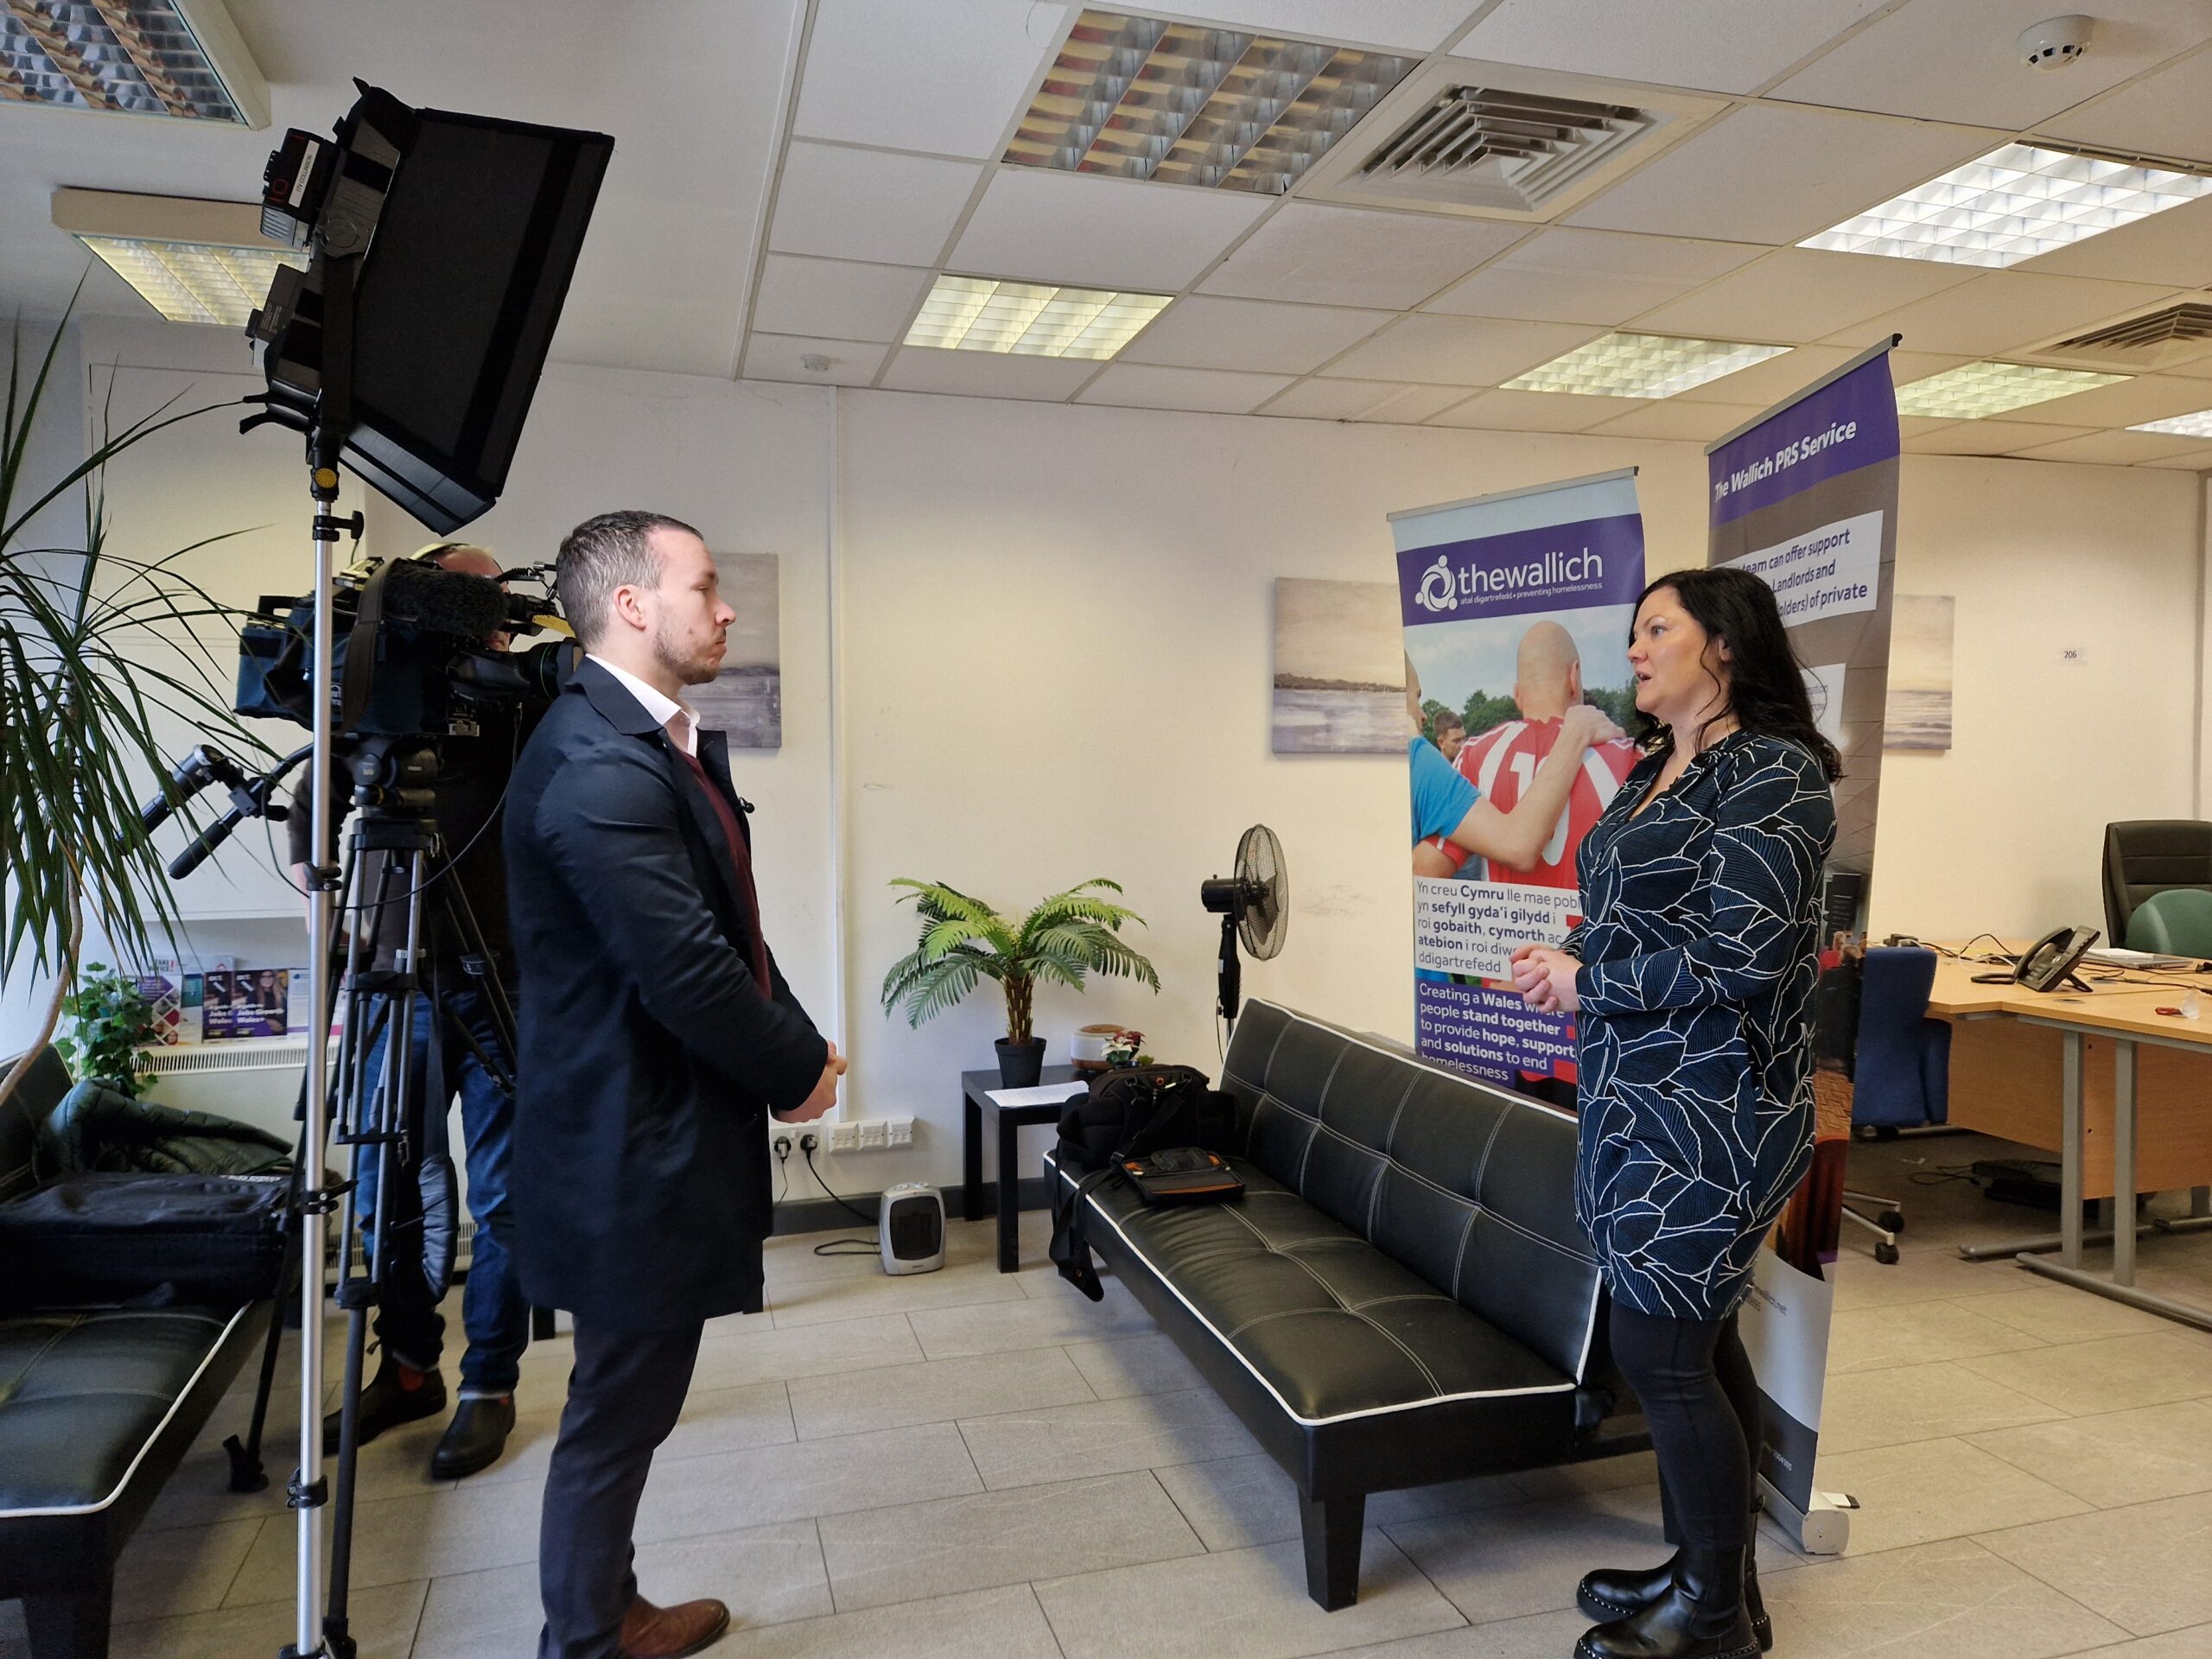 The Wallich CEO interview with TV camera